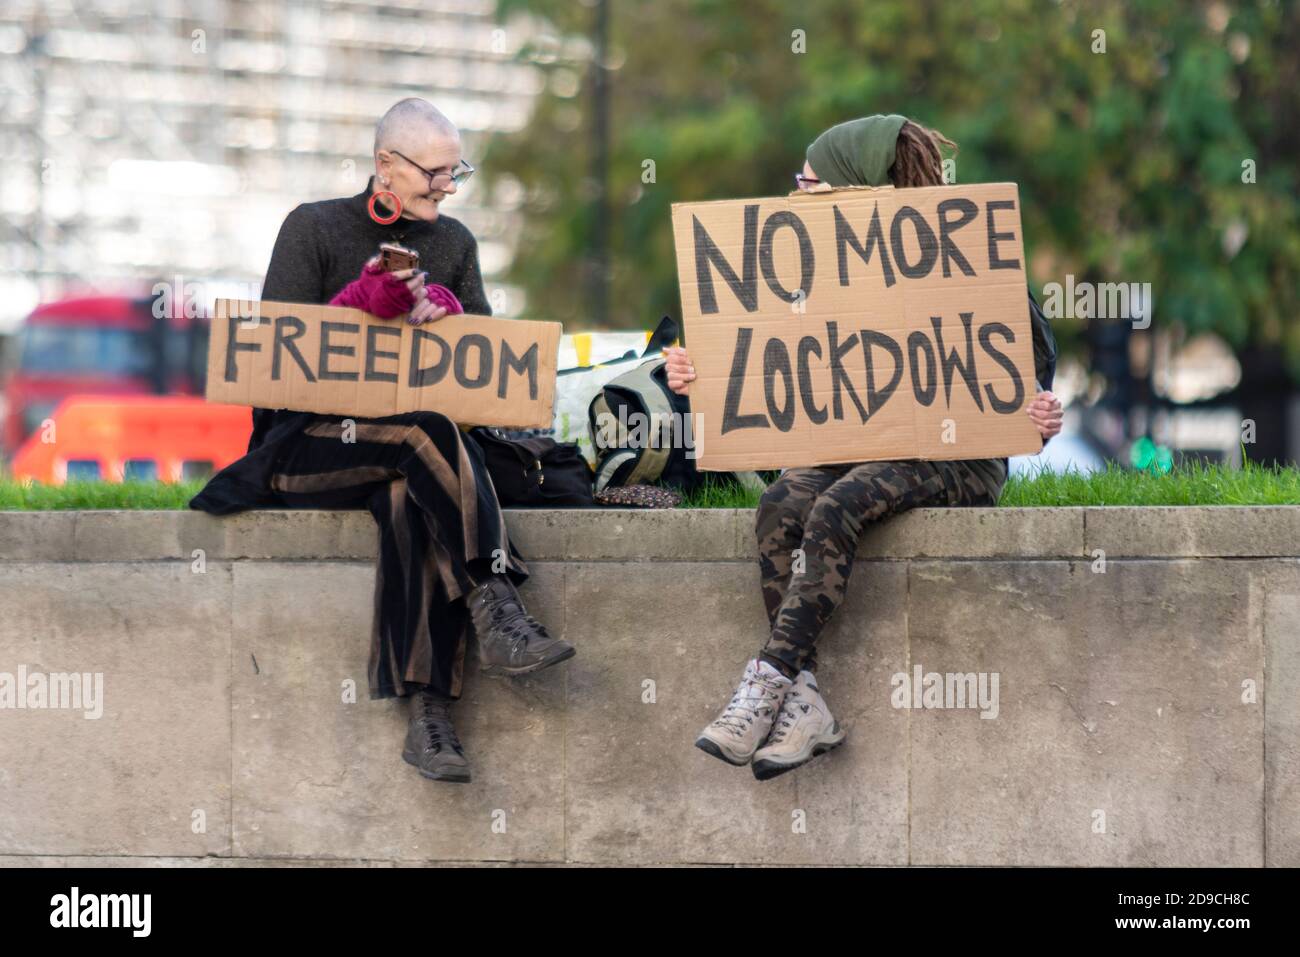 Female anti lockdown protesters with placards. Freedom. Parliament Square, Westminster, London, UK. No more lockdowns, lockdows spelling mistake Stock Photo